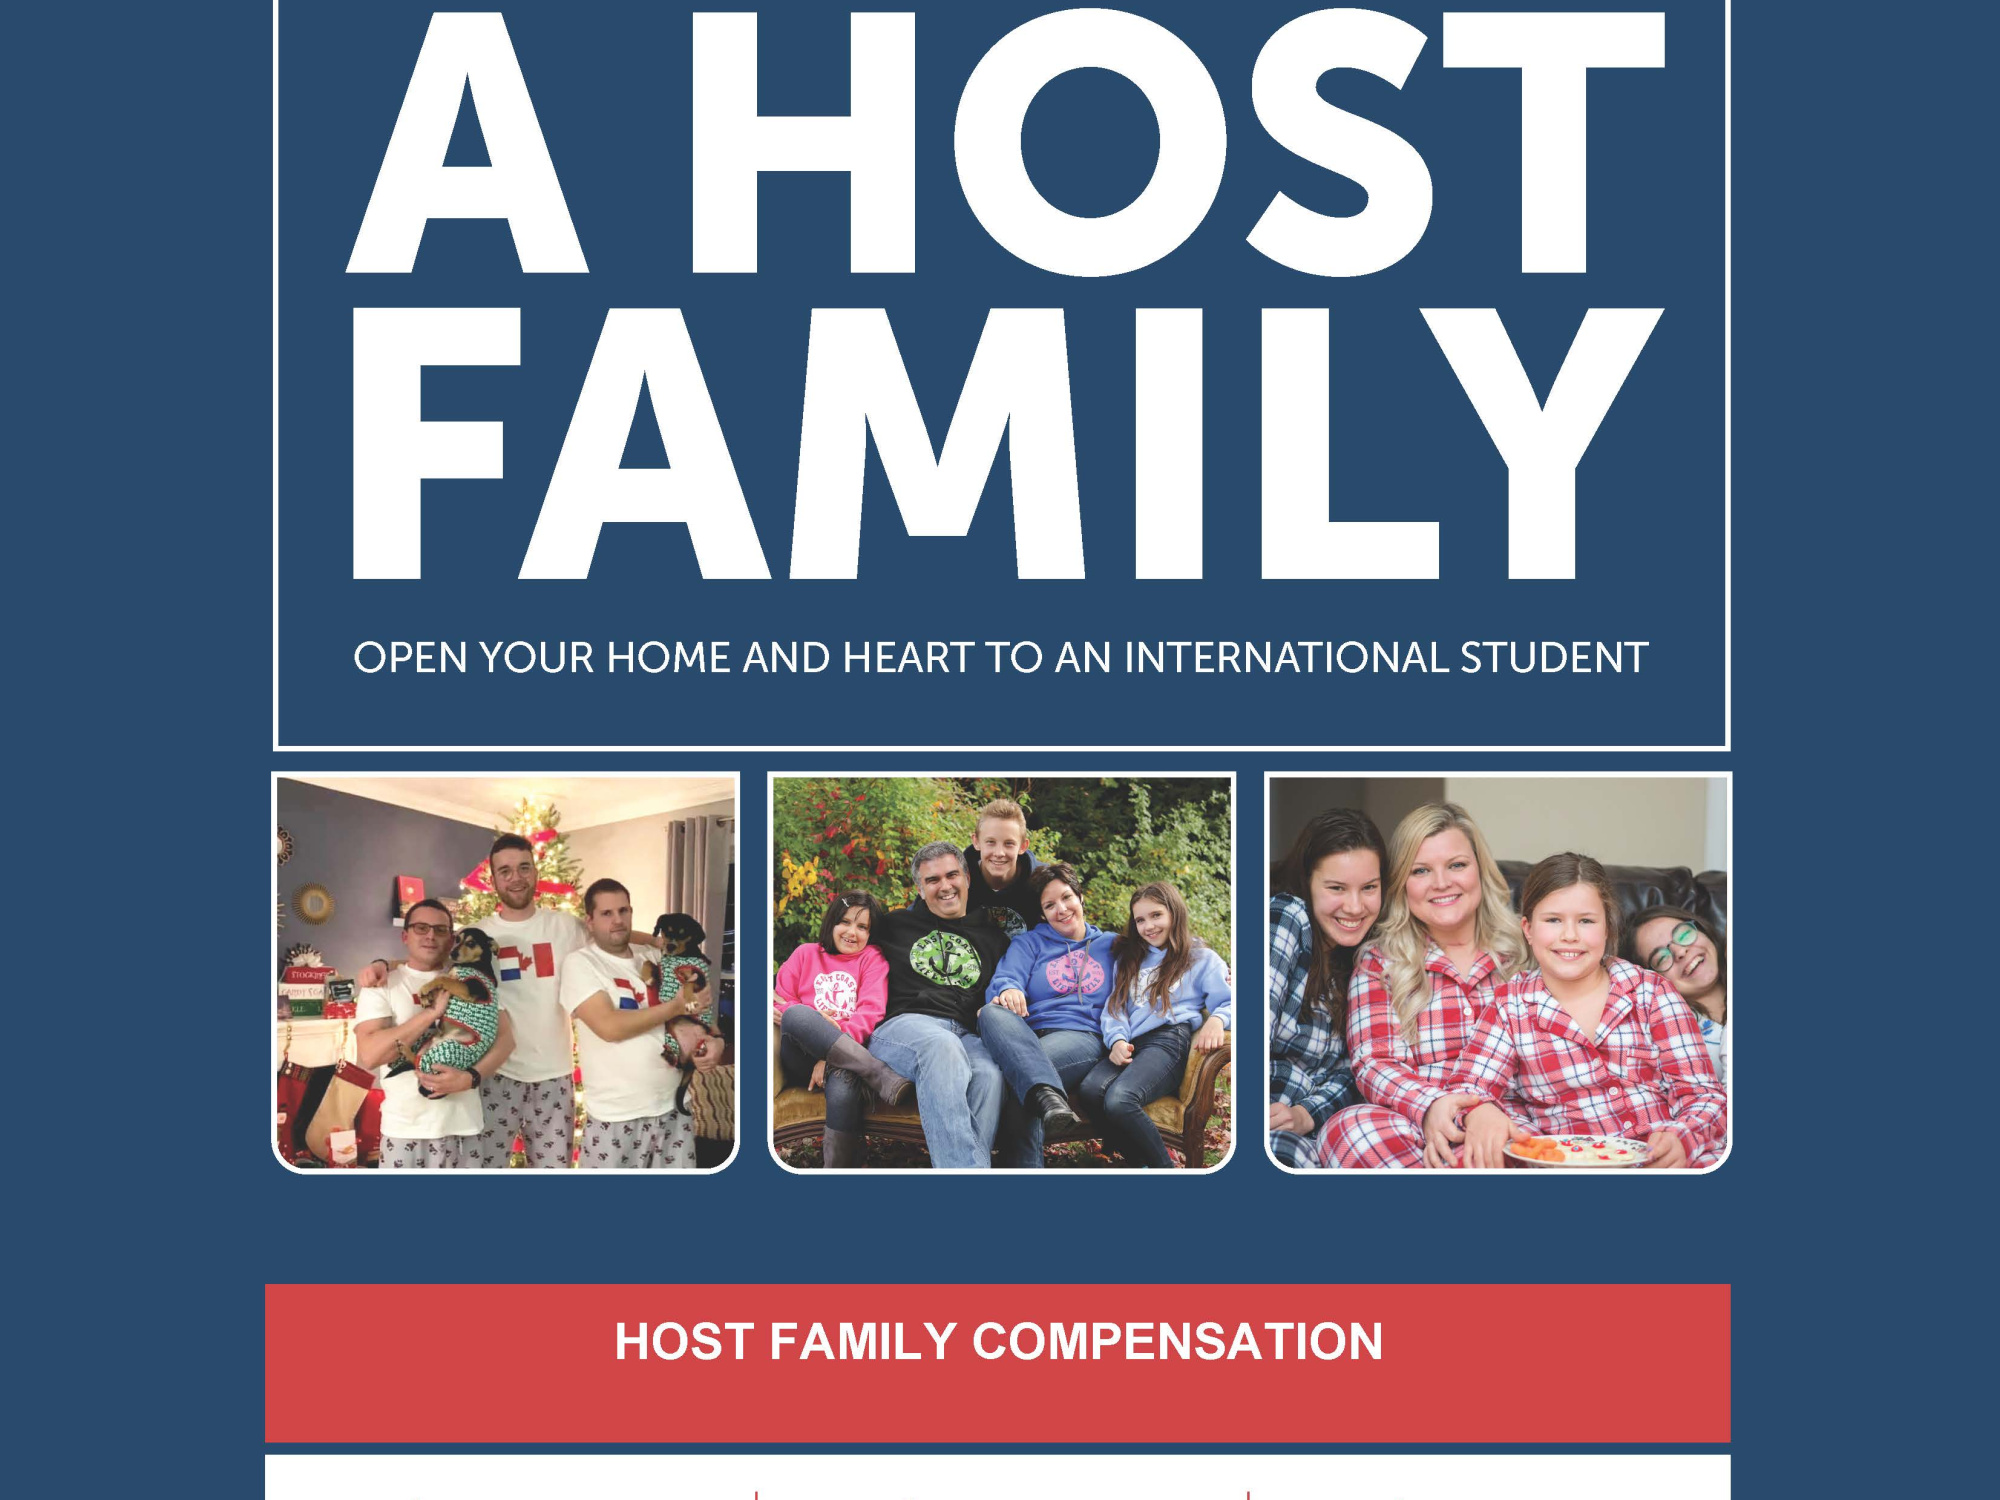 Poster showing host family compensation options: $775 per month per student; $875 per month if you can accommodate a vegetarian or lactose-free diet; $975 per month if you can accommodate a vegan or celiac diet. Refer a new host family and receive $100 upon successful student placement.